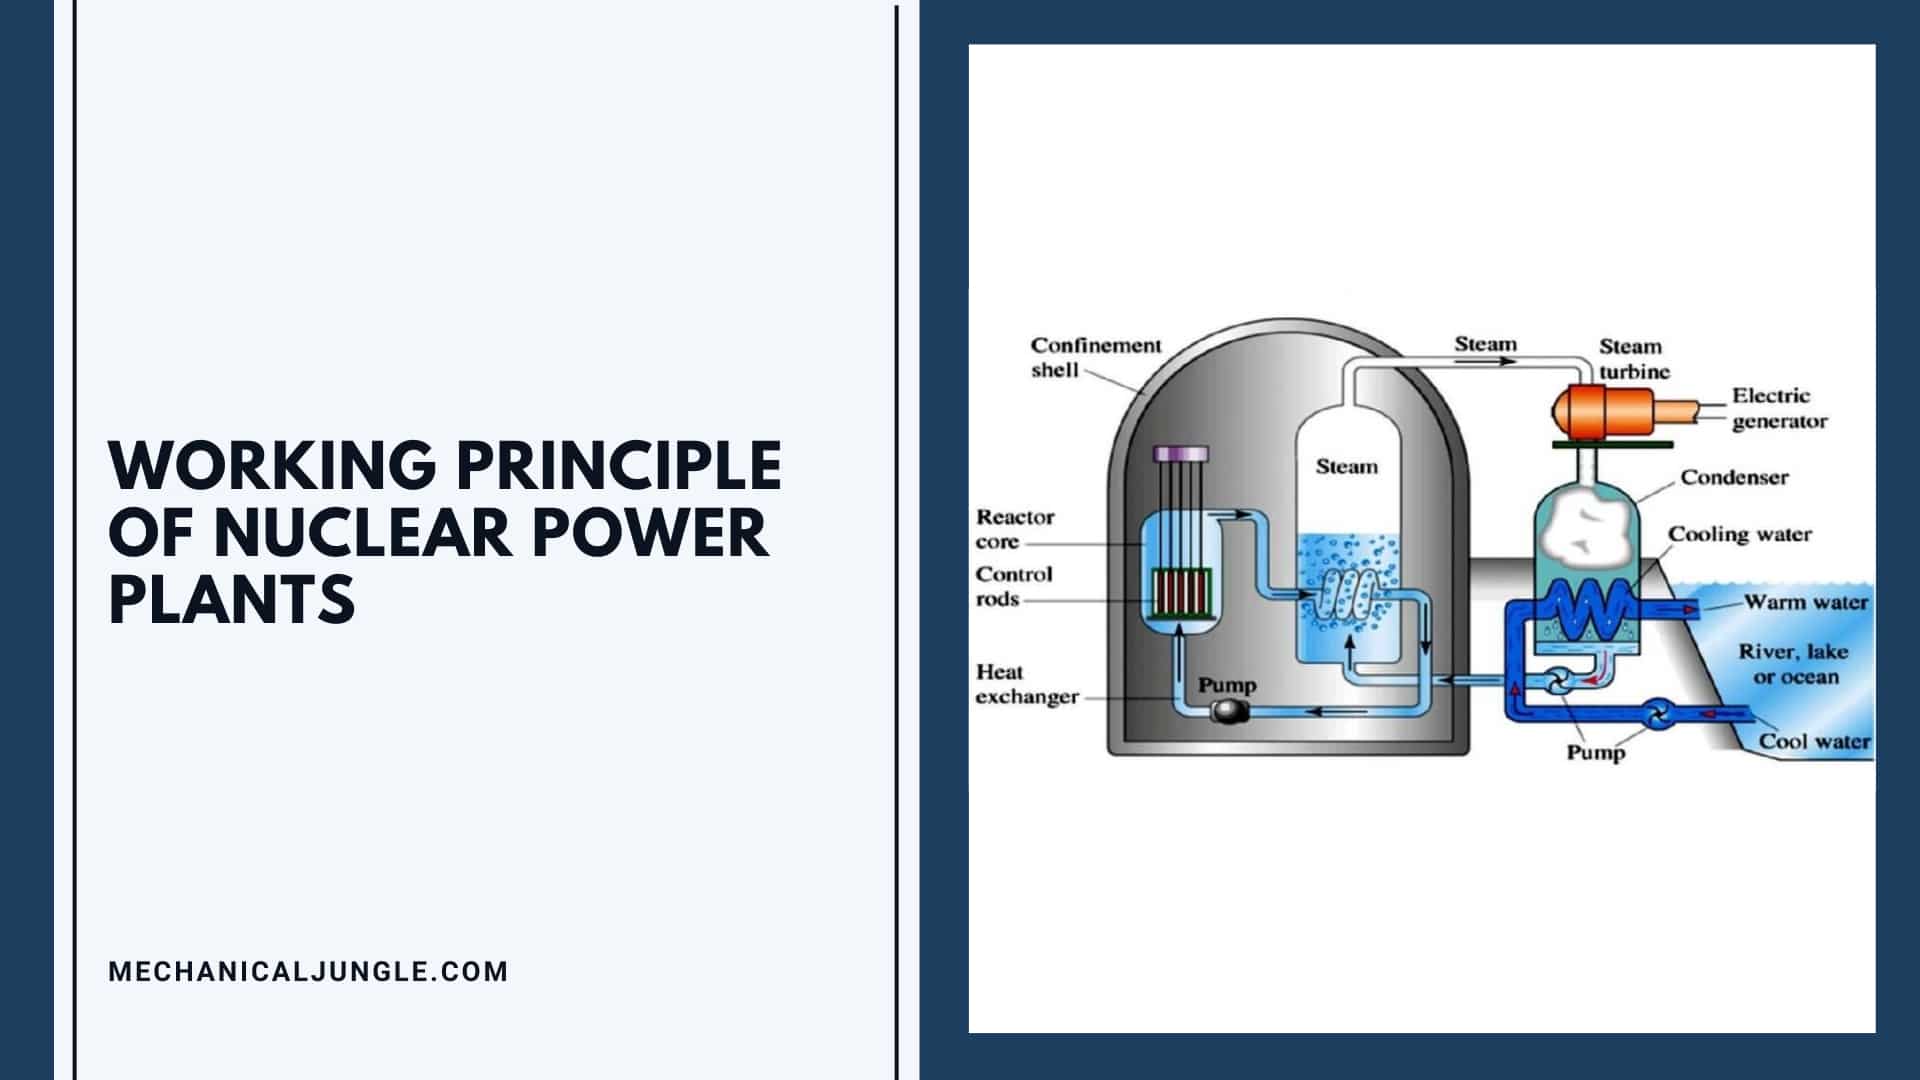 Working Principle of Nuclear Power Plants